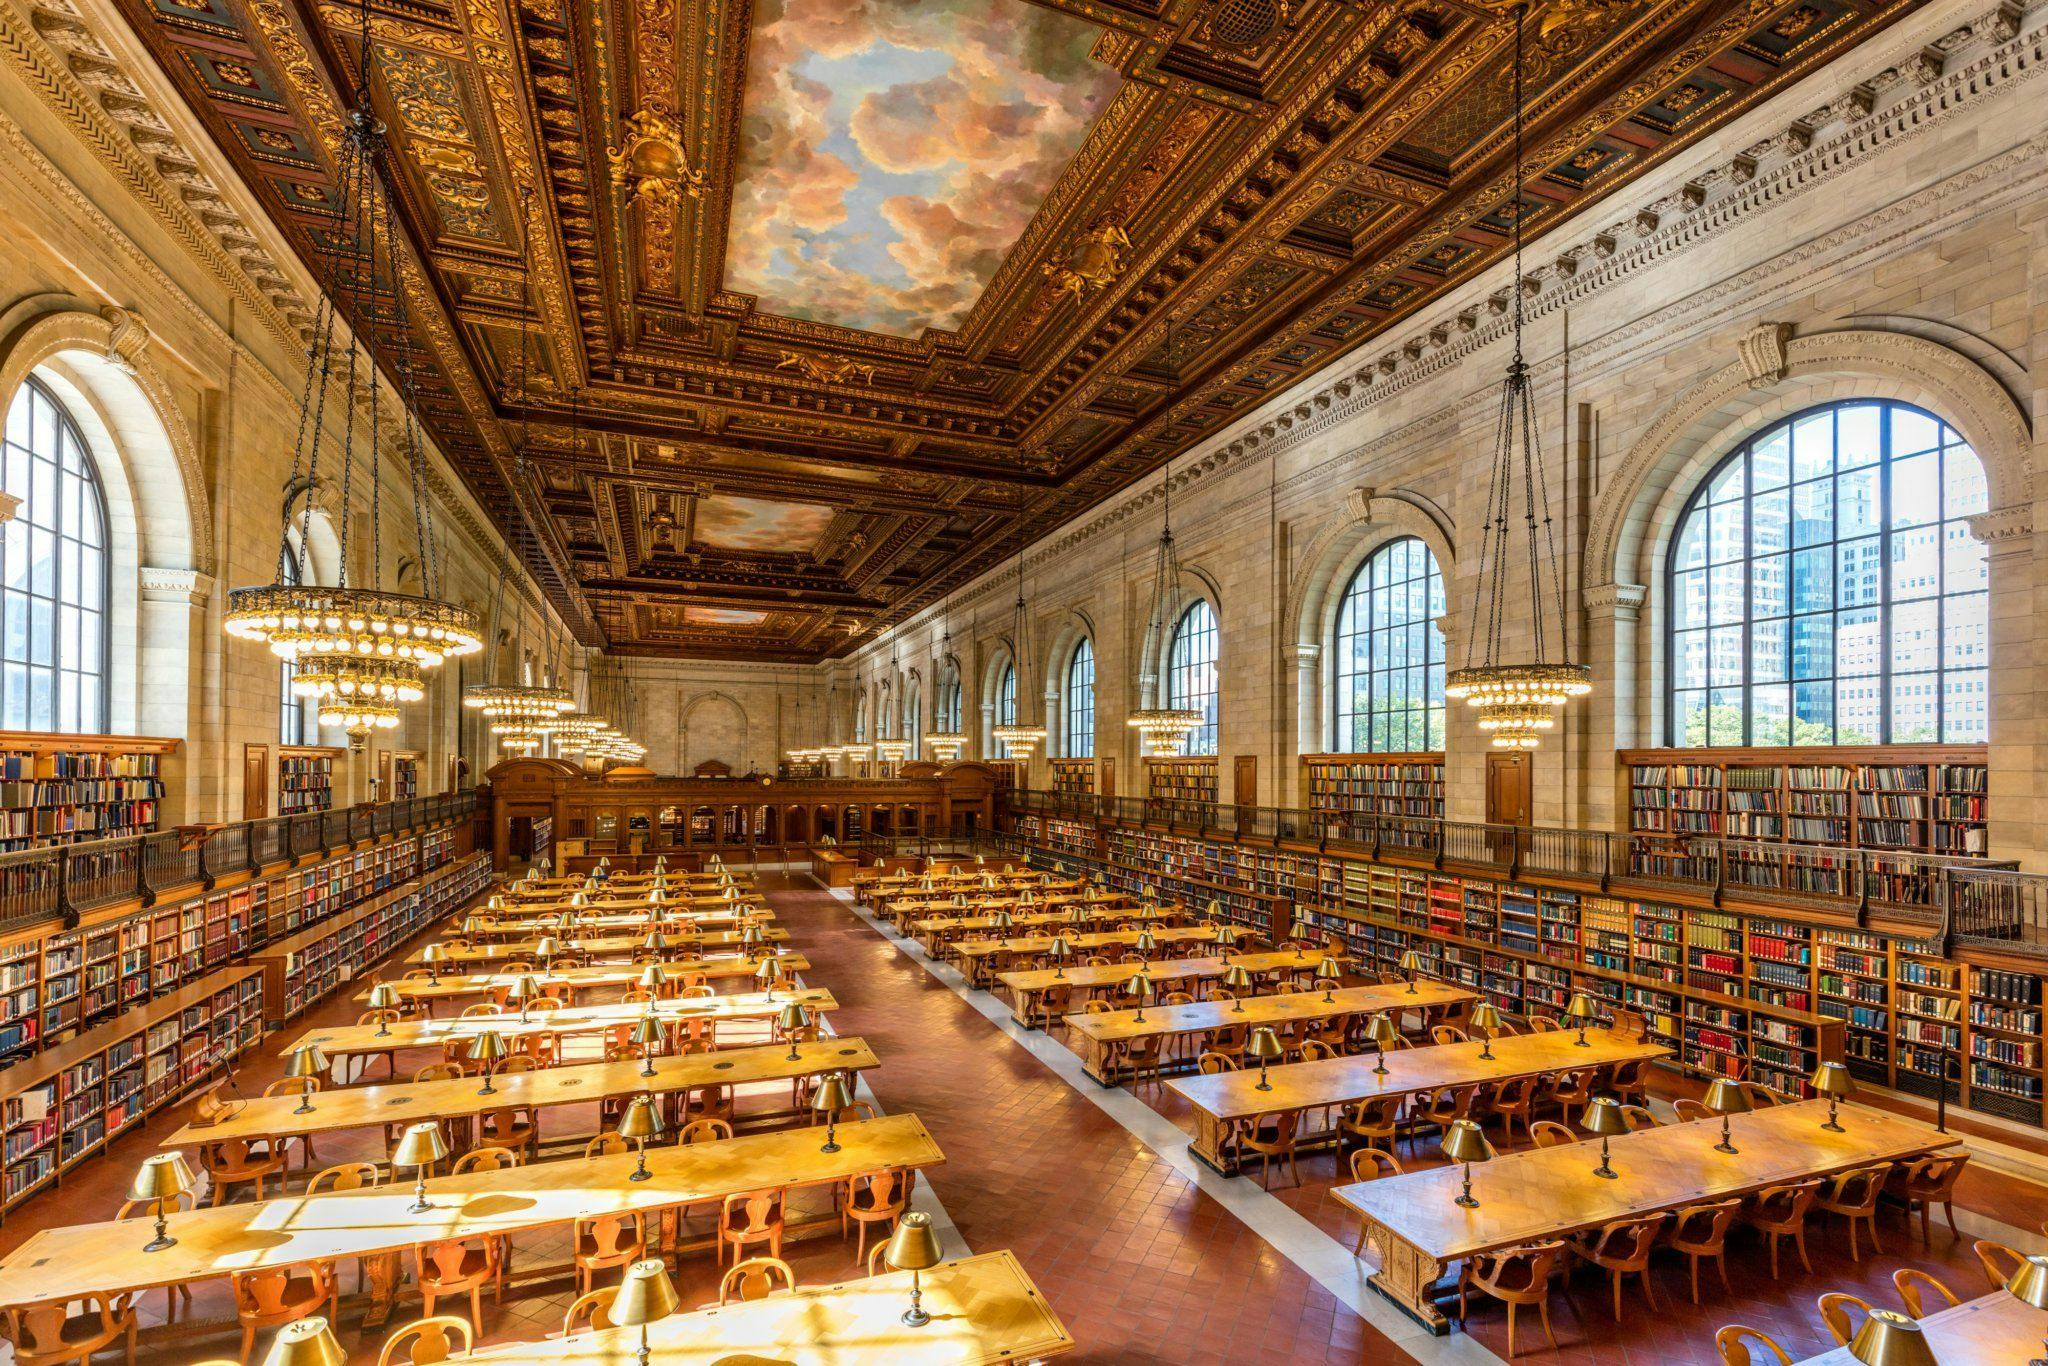 Rose Main Reading Room in the New York Public Library